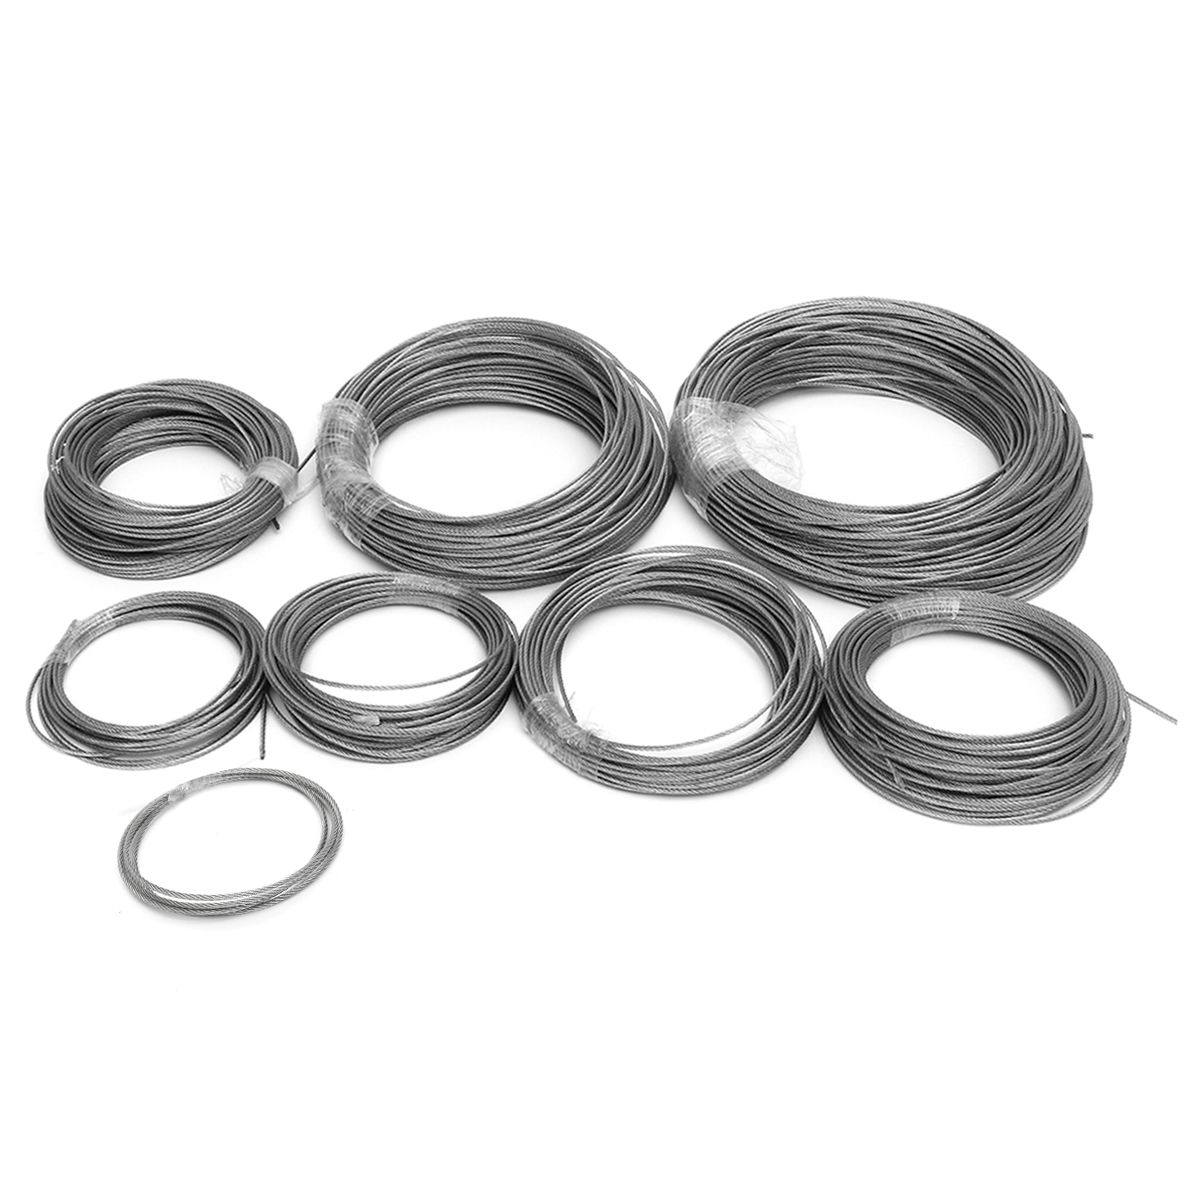 15mm-Stainless-Steel-Wire-Rope-Tensile-Diameter-Structure-Cable-1256988